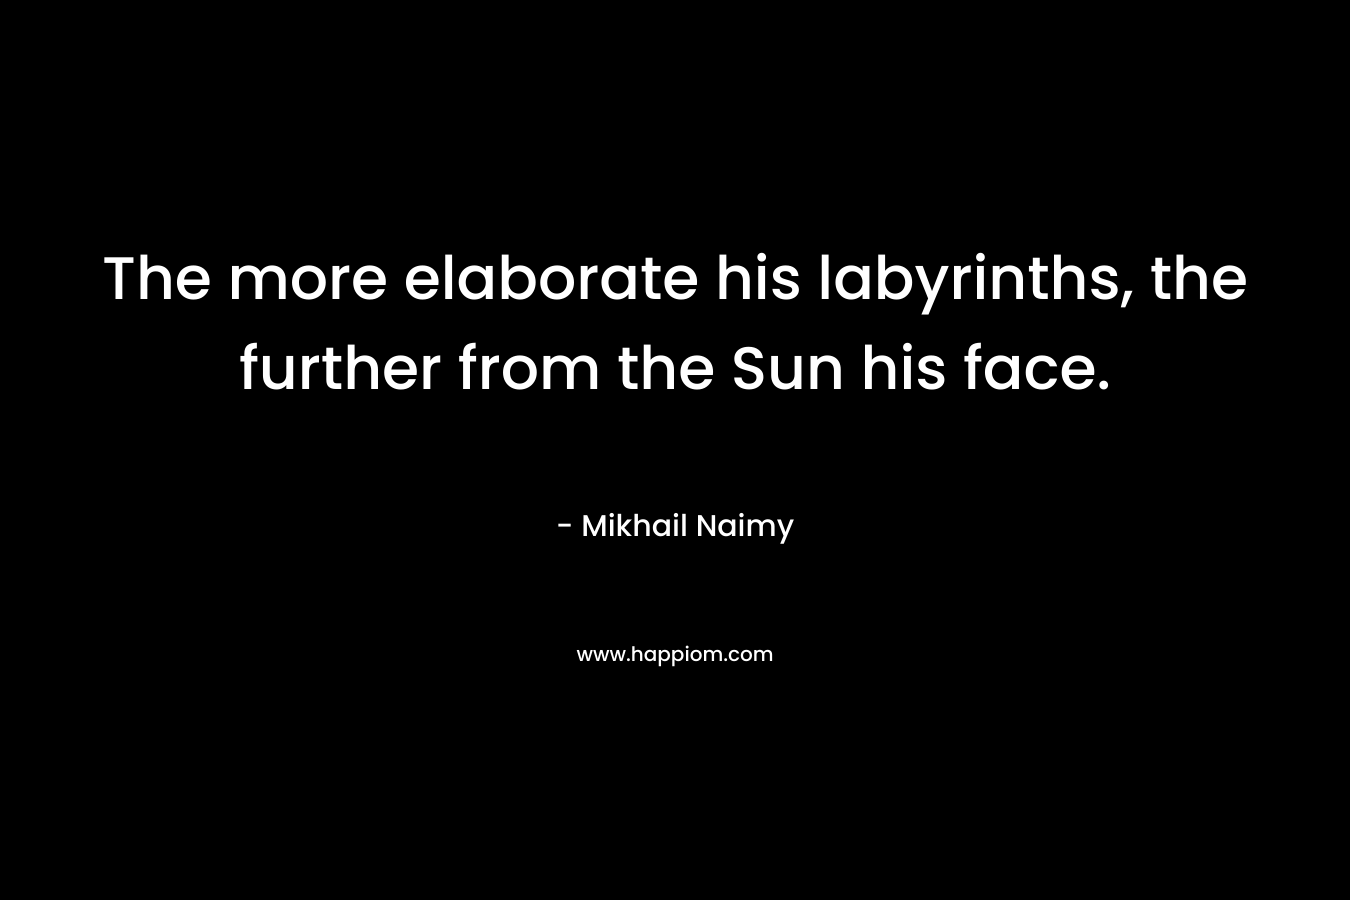 The more elaborate his labyrinths, the further from the Sun his face. – Mikhail Naimy